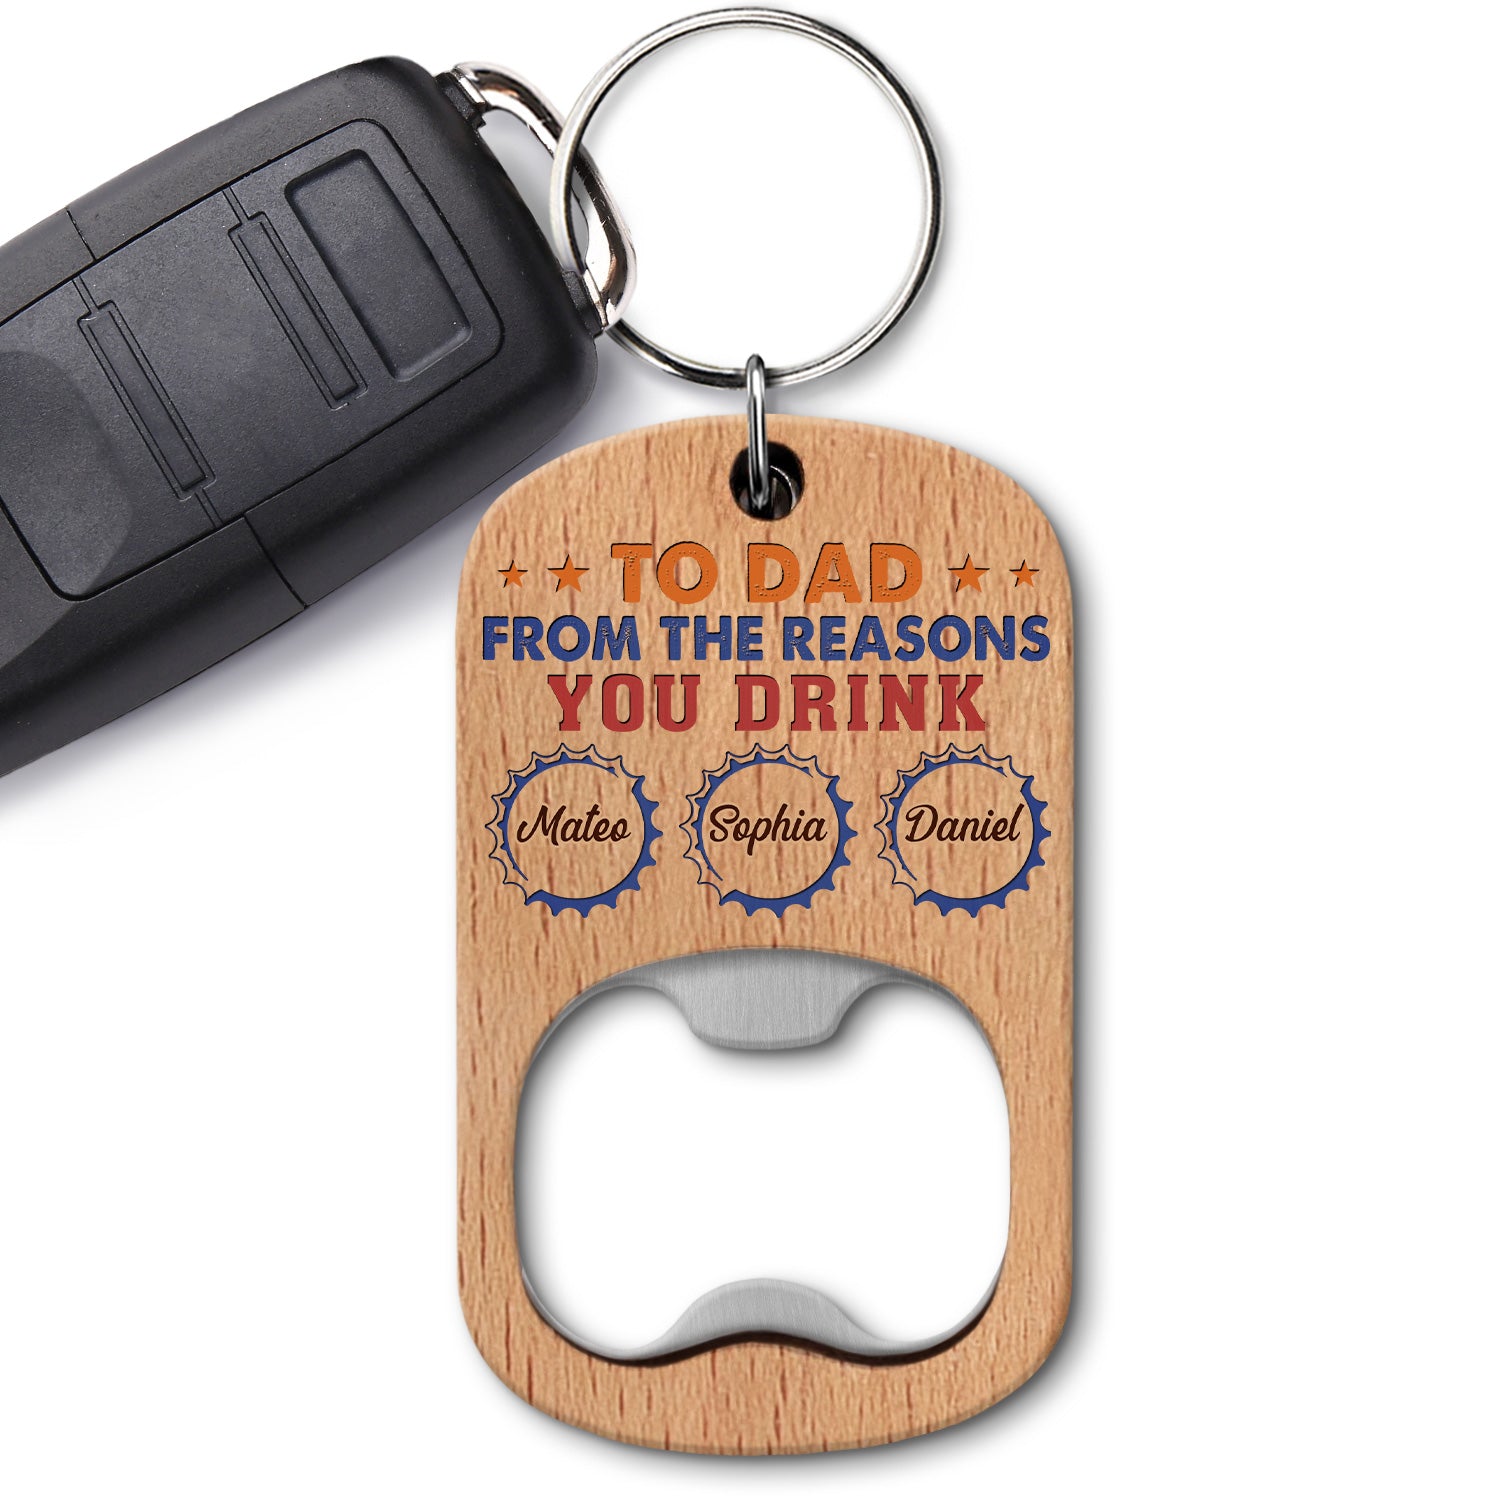 To Dad From The Reason You Drink - Gift For Father, Daddy, Papa, Uncle - Personalized Bottle Opener Keychain